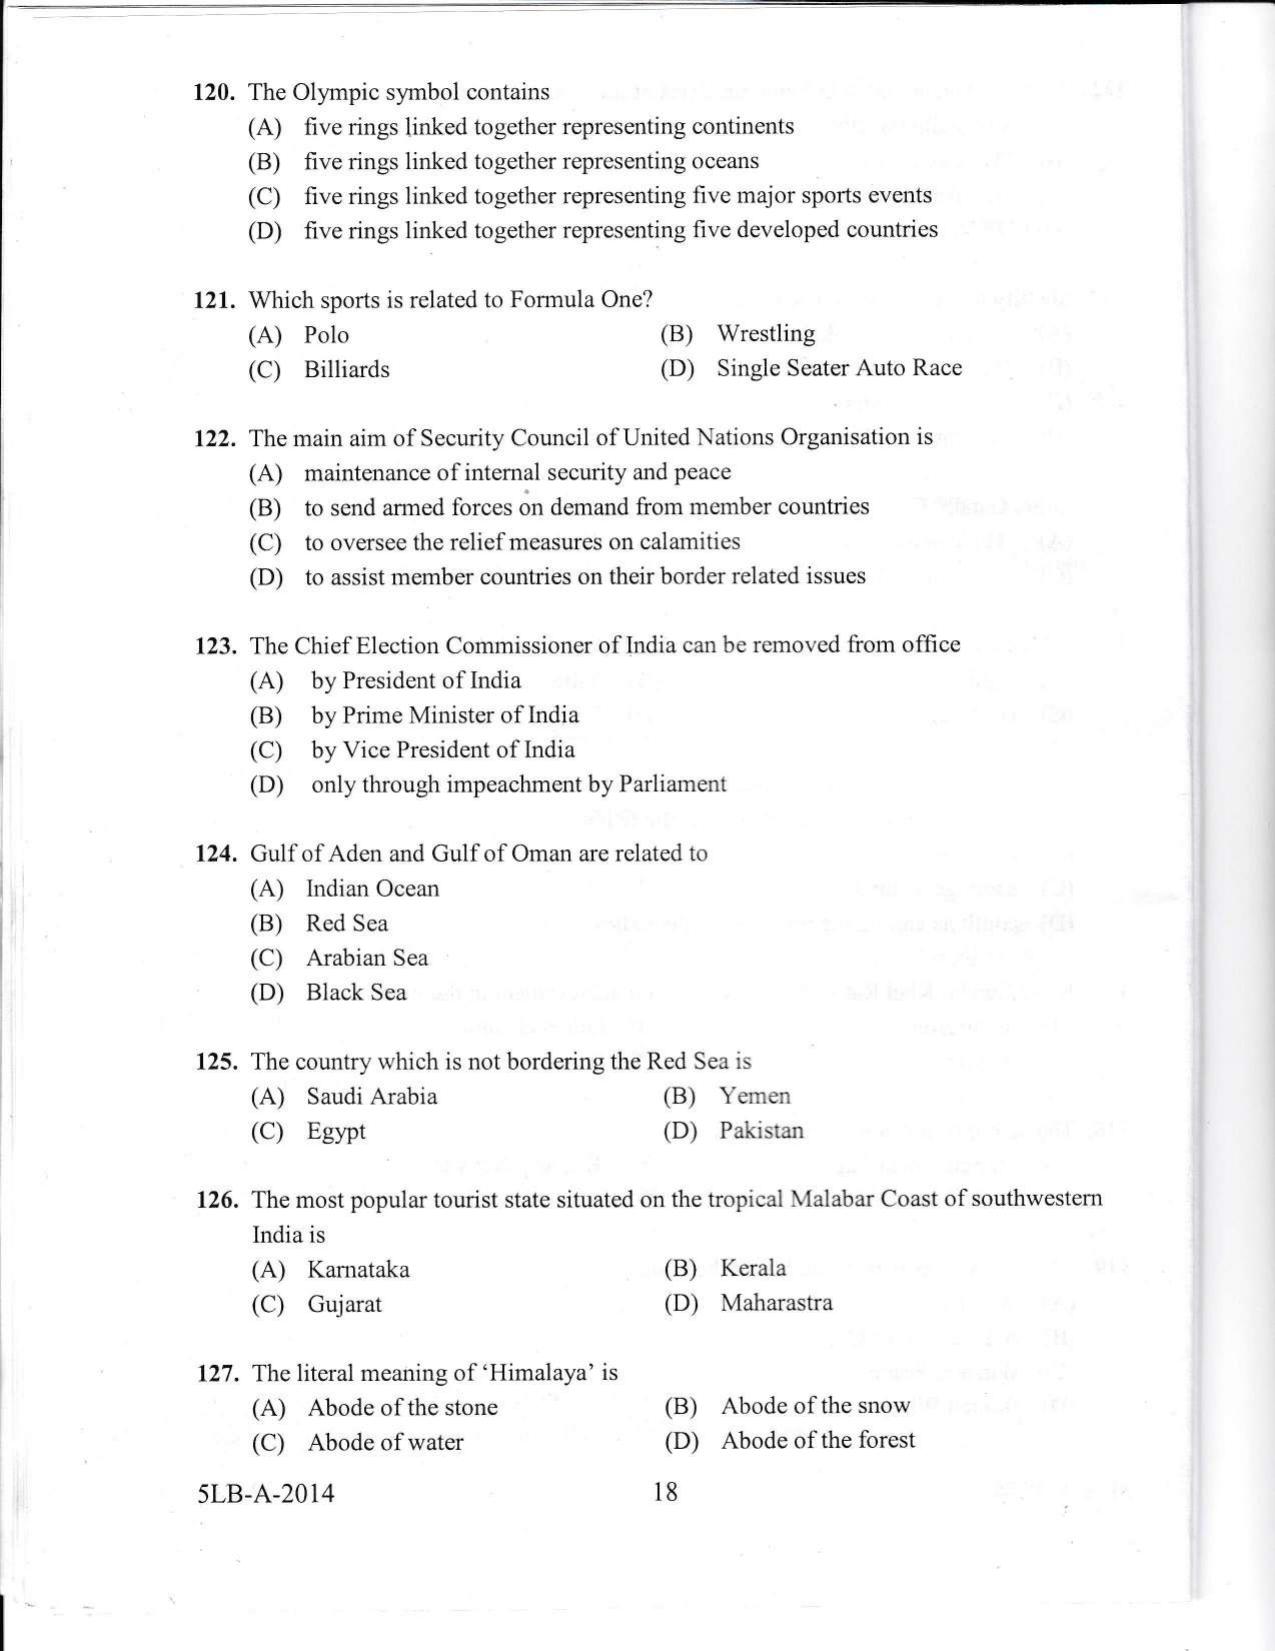 KLEE 5 Year LLB Exam 2014 Question Paper - Page 18